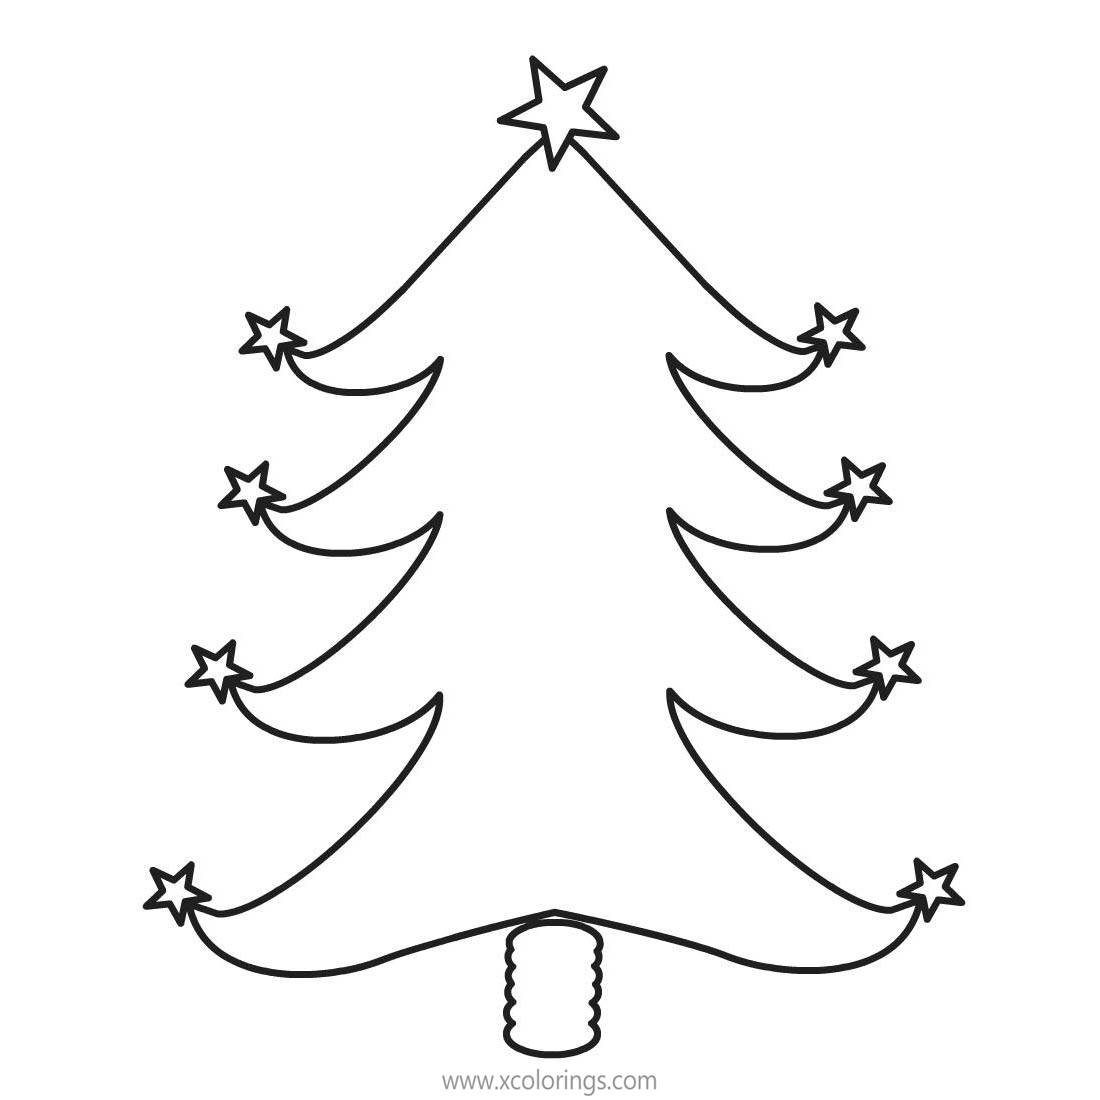 Free Christmas Tree with Stars Coloring Pages printable